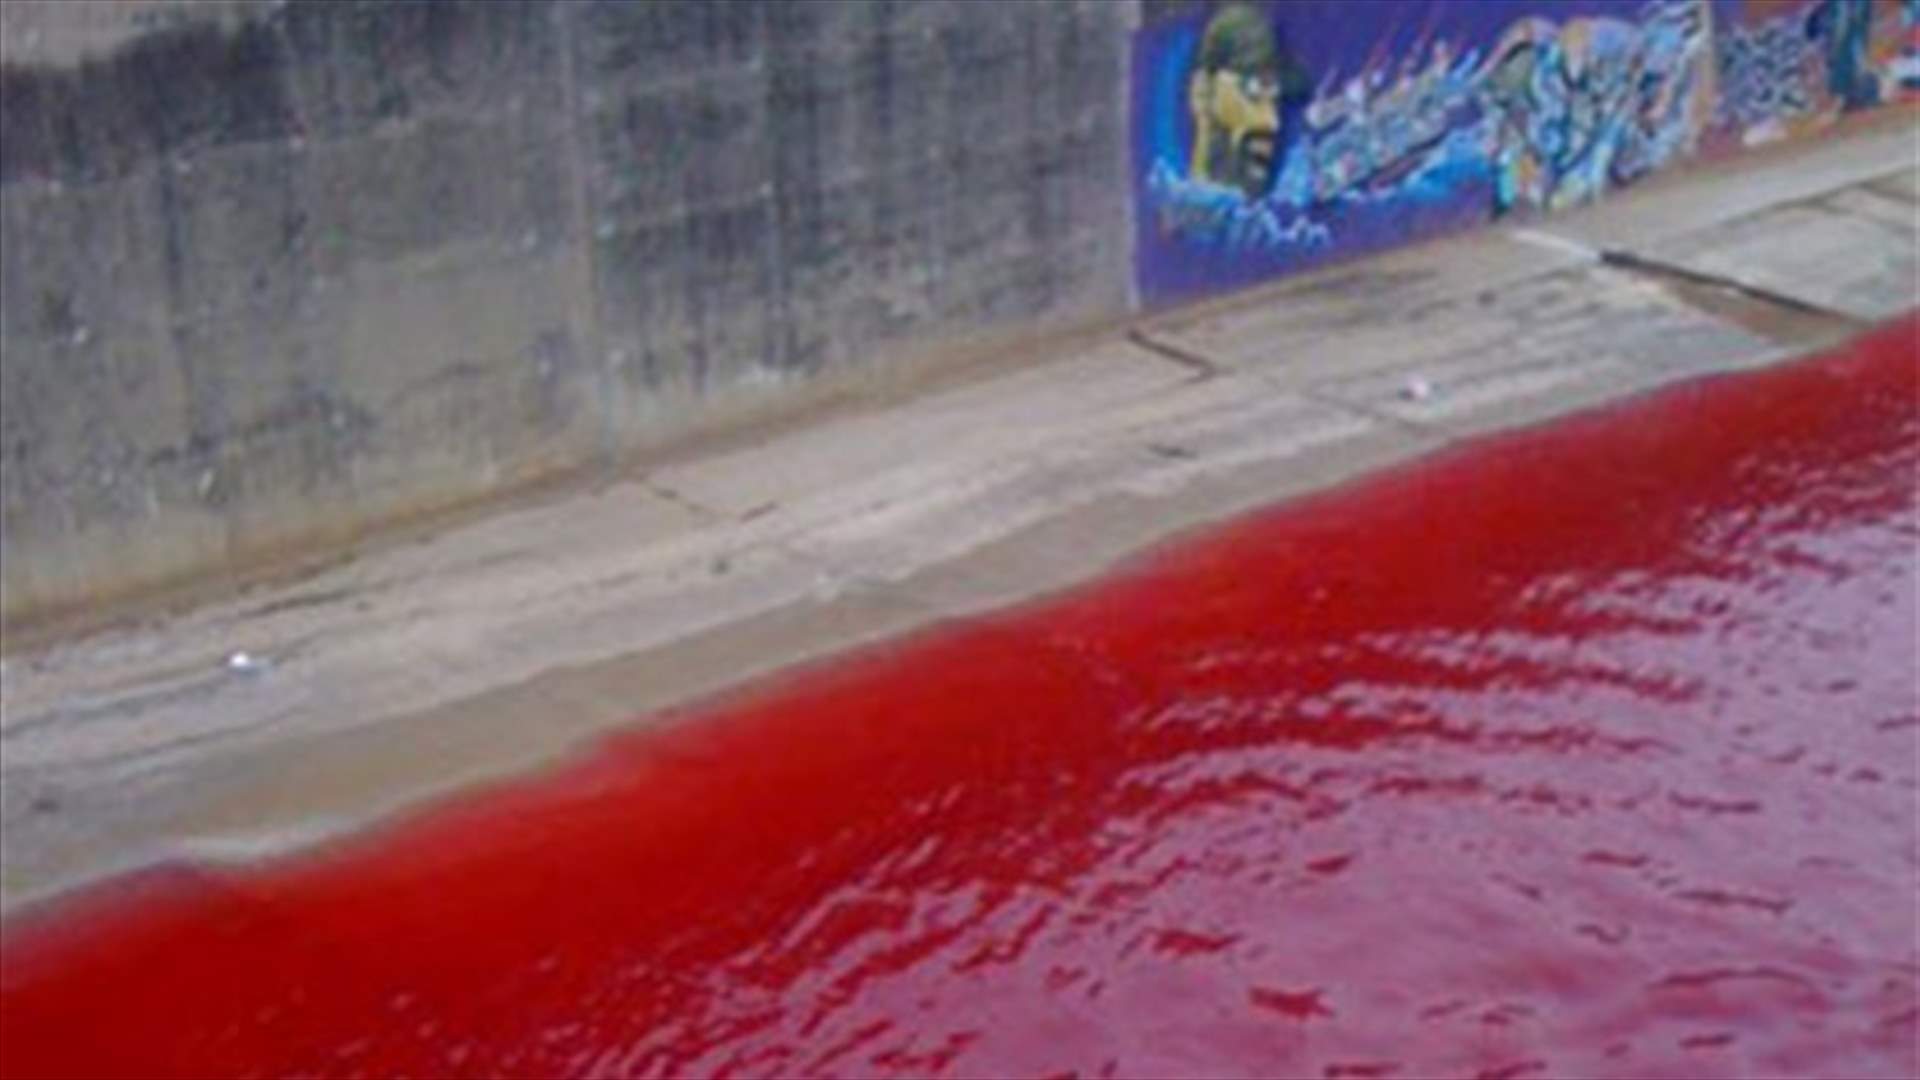 Blood-red Beirut River: Cause yet unknown